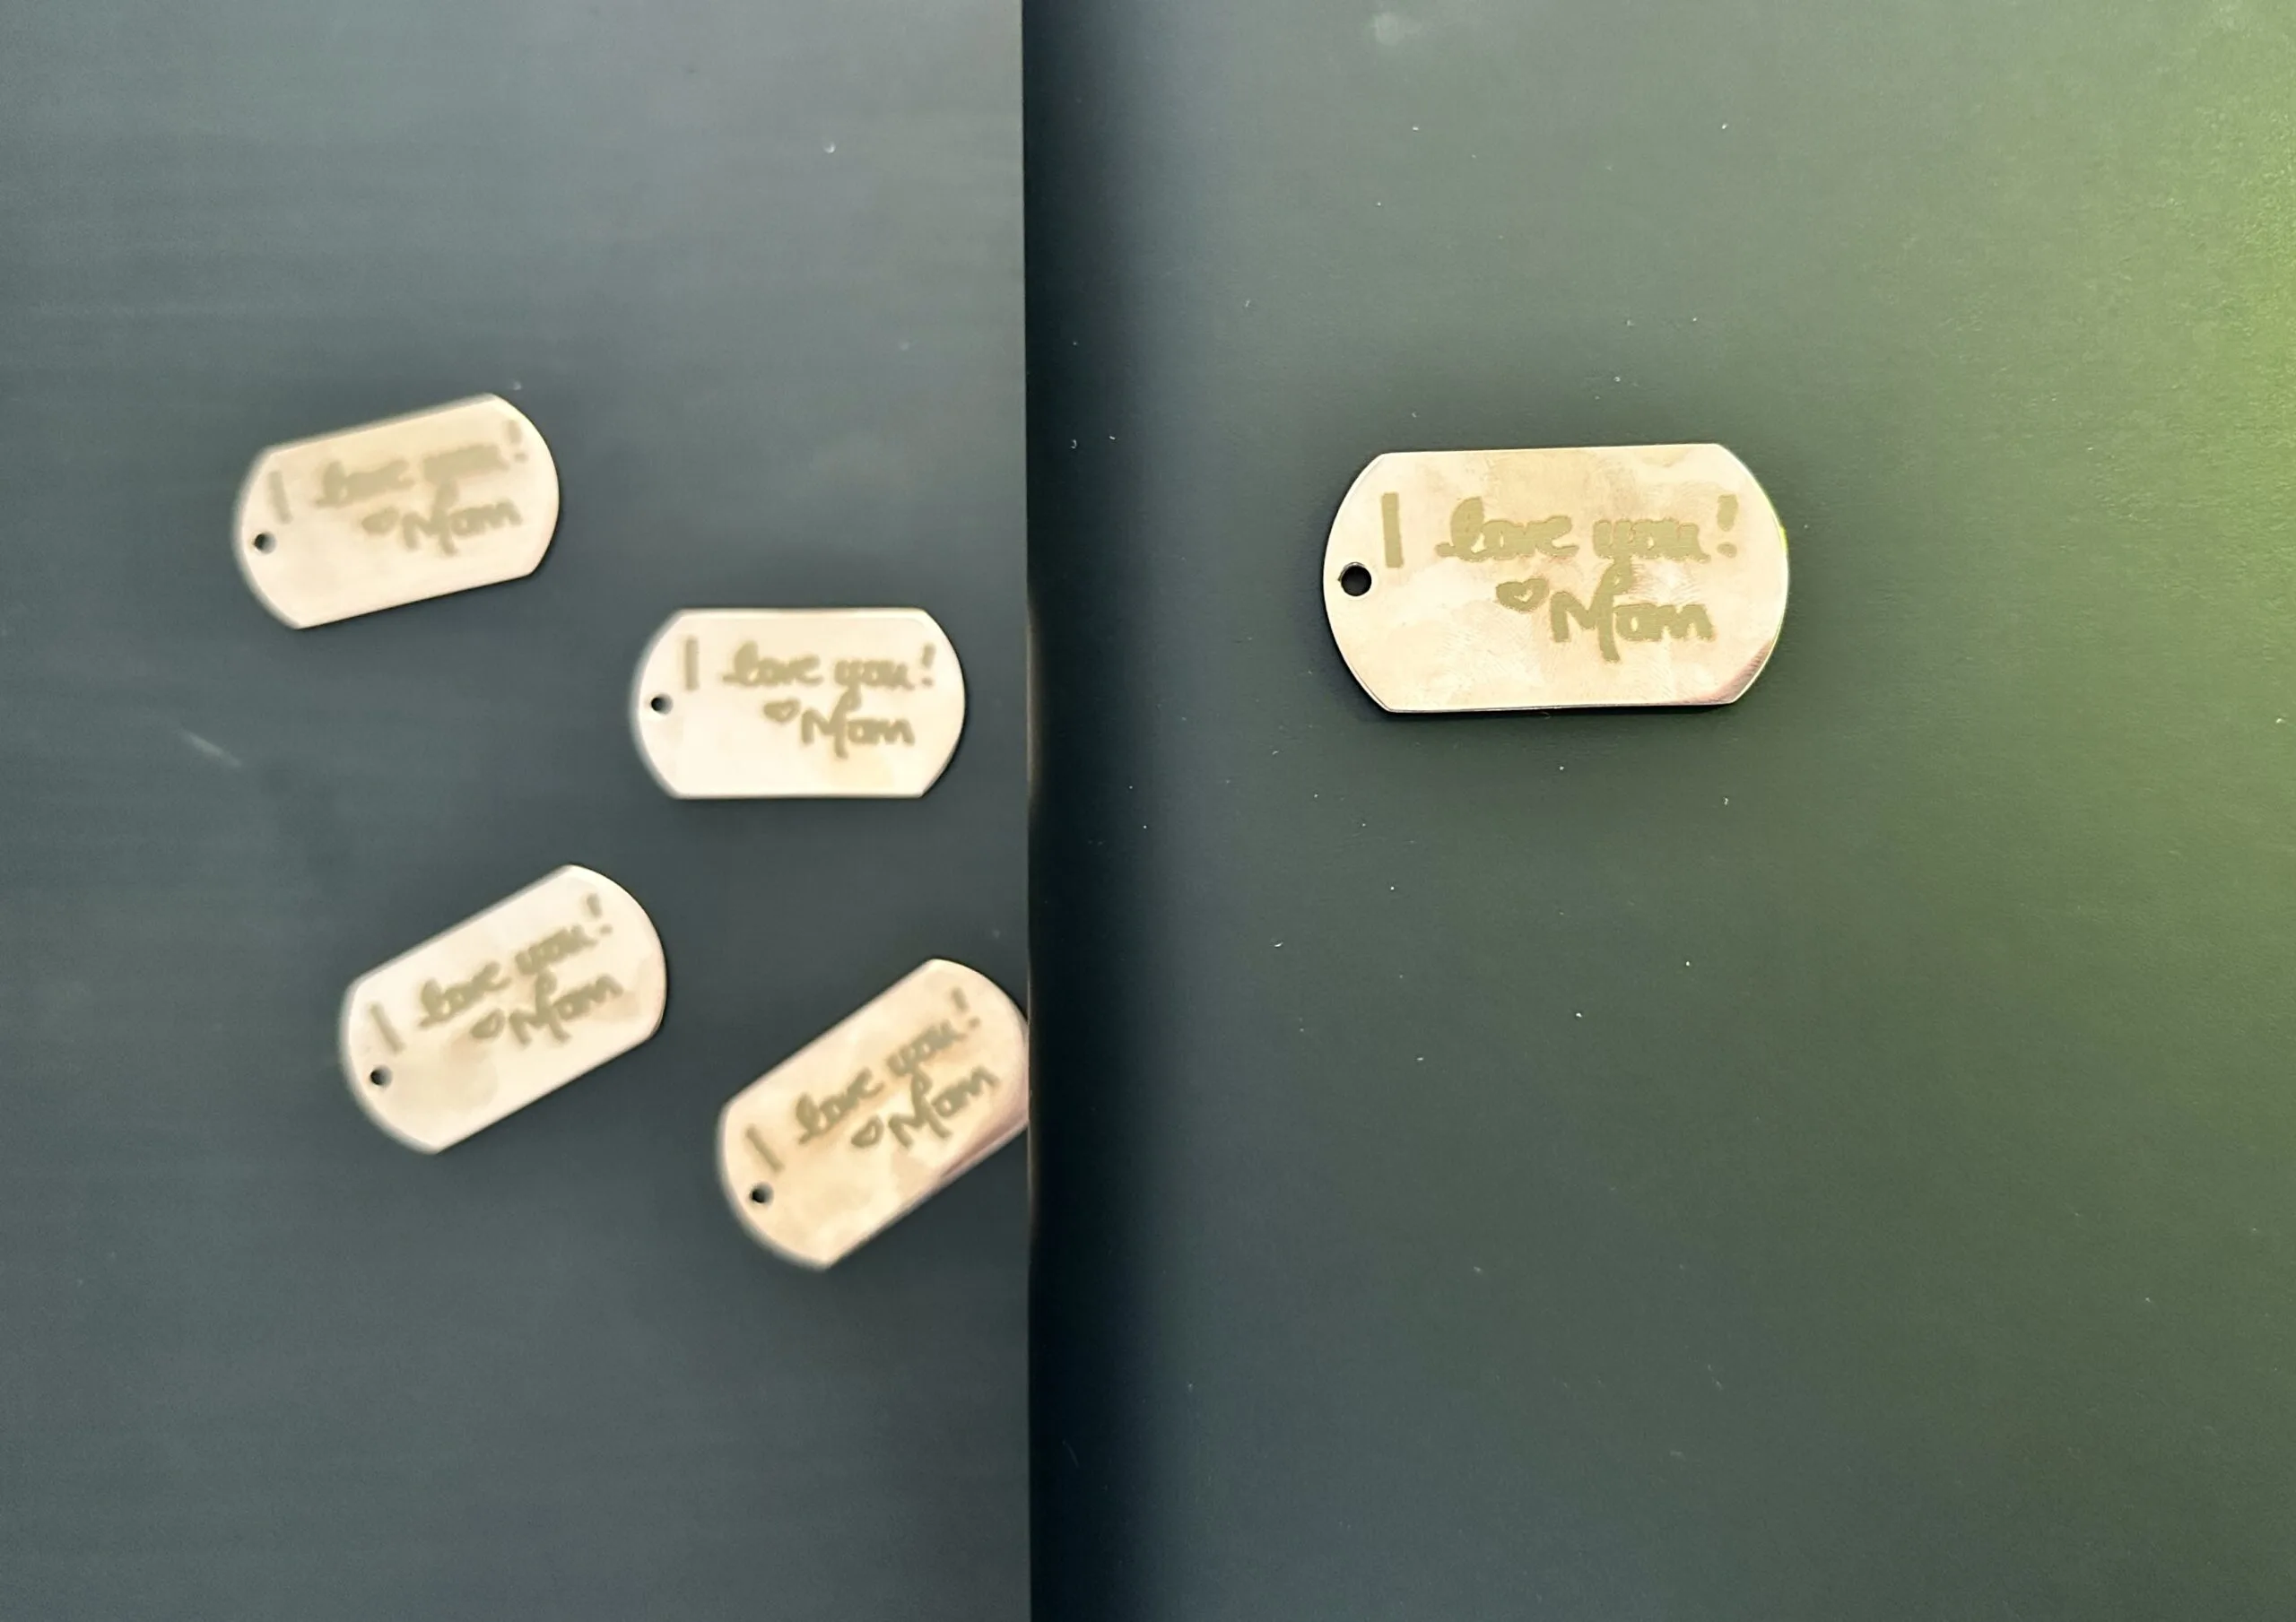 Processed engraved dog tags using the xTool F1 Ultra conveyor belt - cuttingforbusiness.com